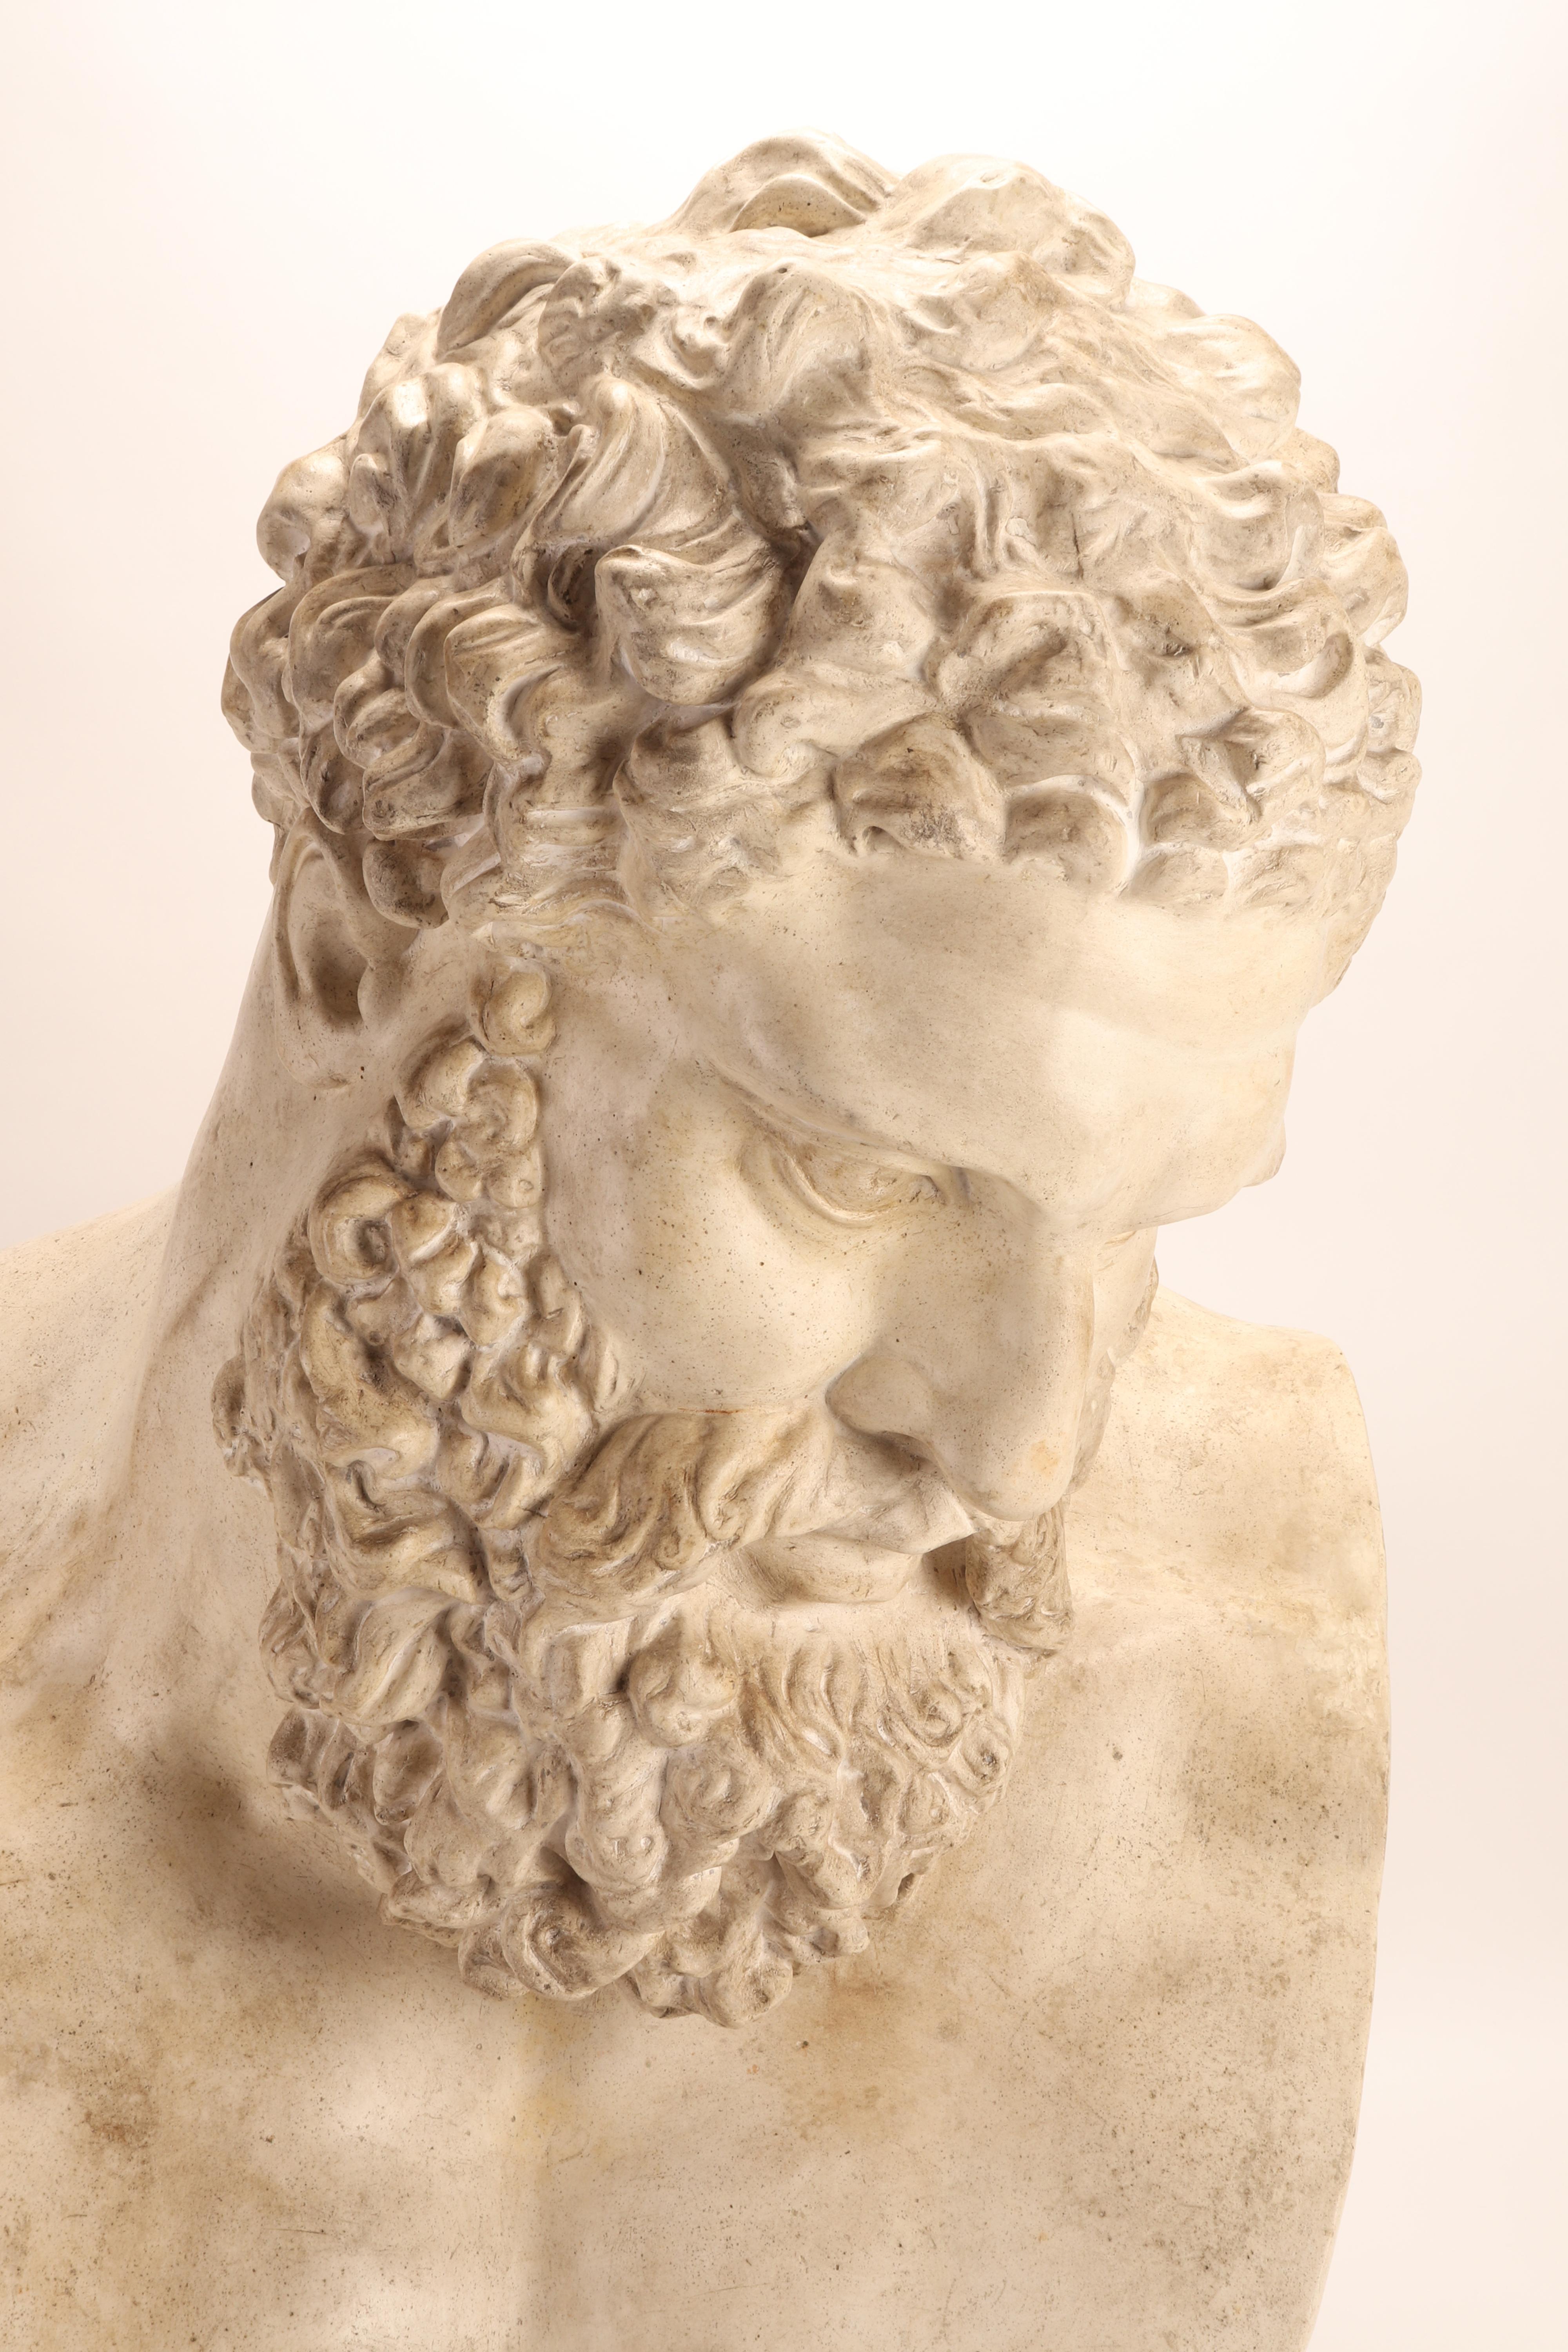 Plaster cast of the head of Farnese Hercules, scale 1:1. Original patina. Cast for the teaching drawing in the academy. Italy circa 1880.